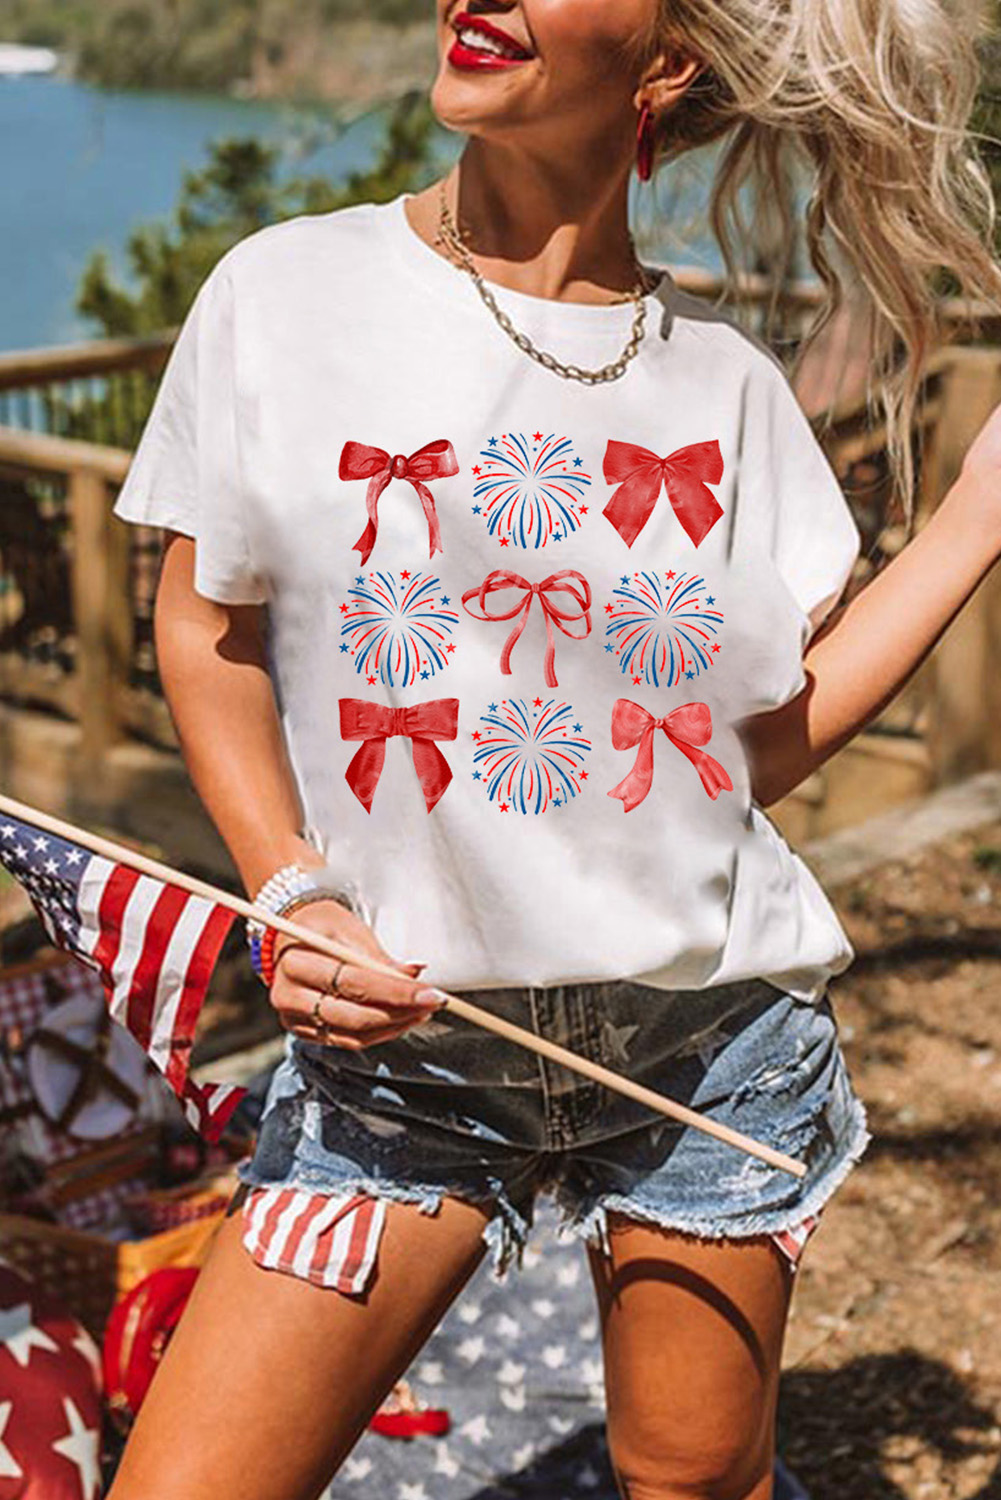 Shewin Wholesale Chic Female White July 4th Bowknot FIREWORK Graphic Tee